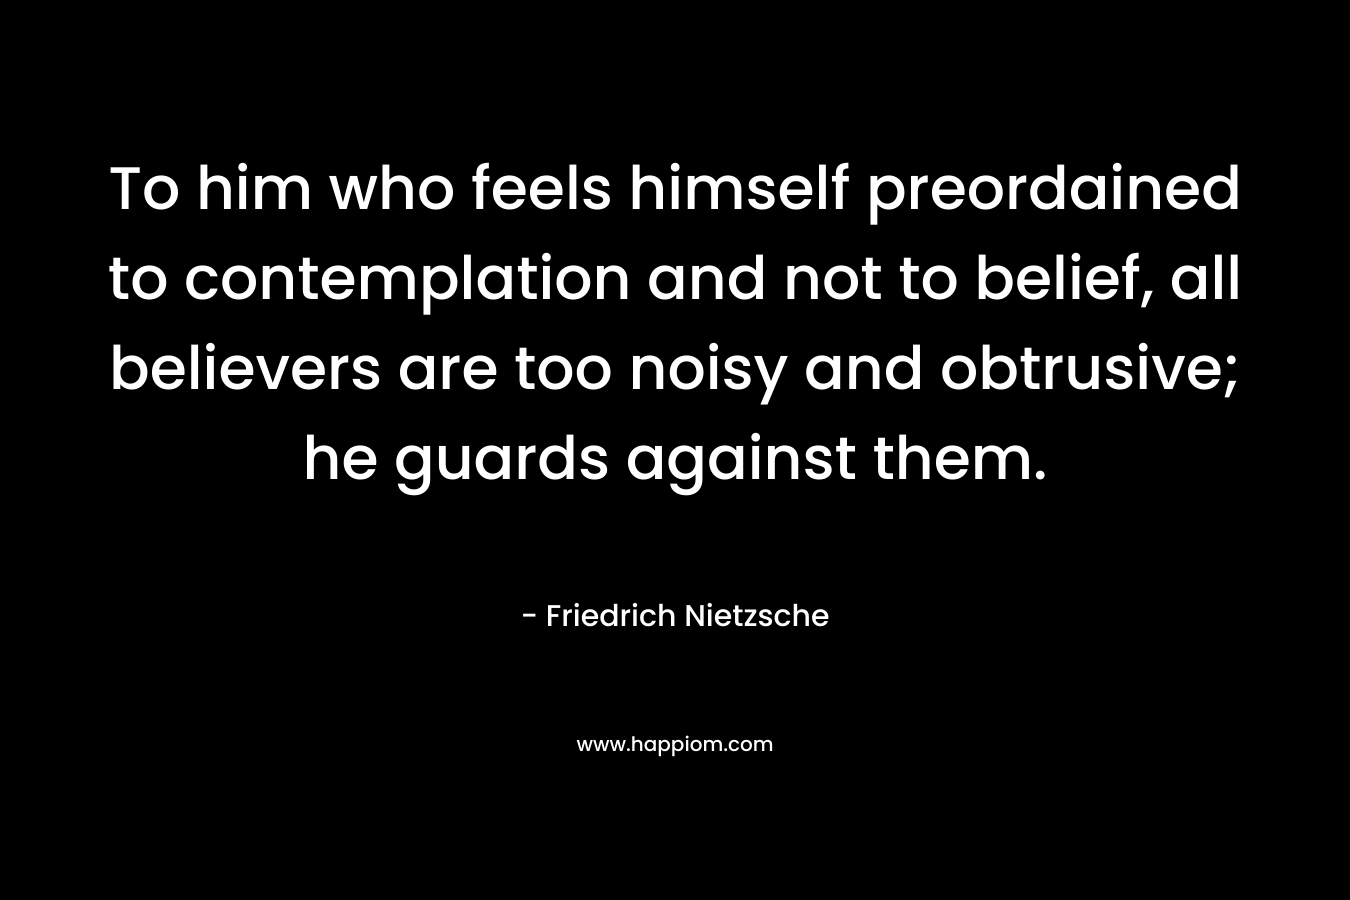 To him who feels himself preordained to contemplation and not to belief, all believers are too noisy and obtrusive; he guards against them. – Friedrich Nietzsche